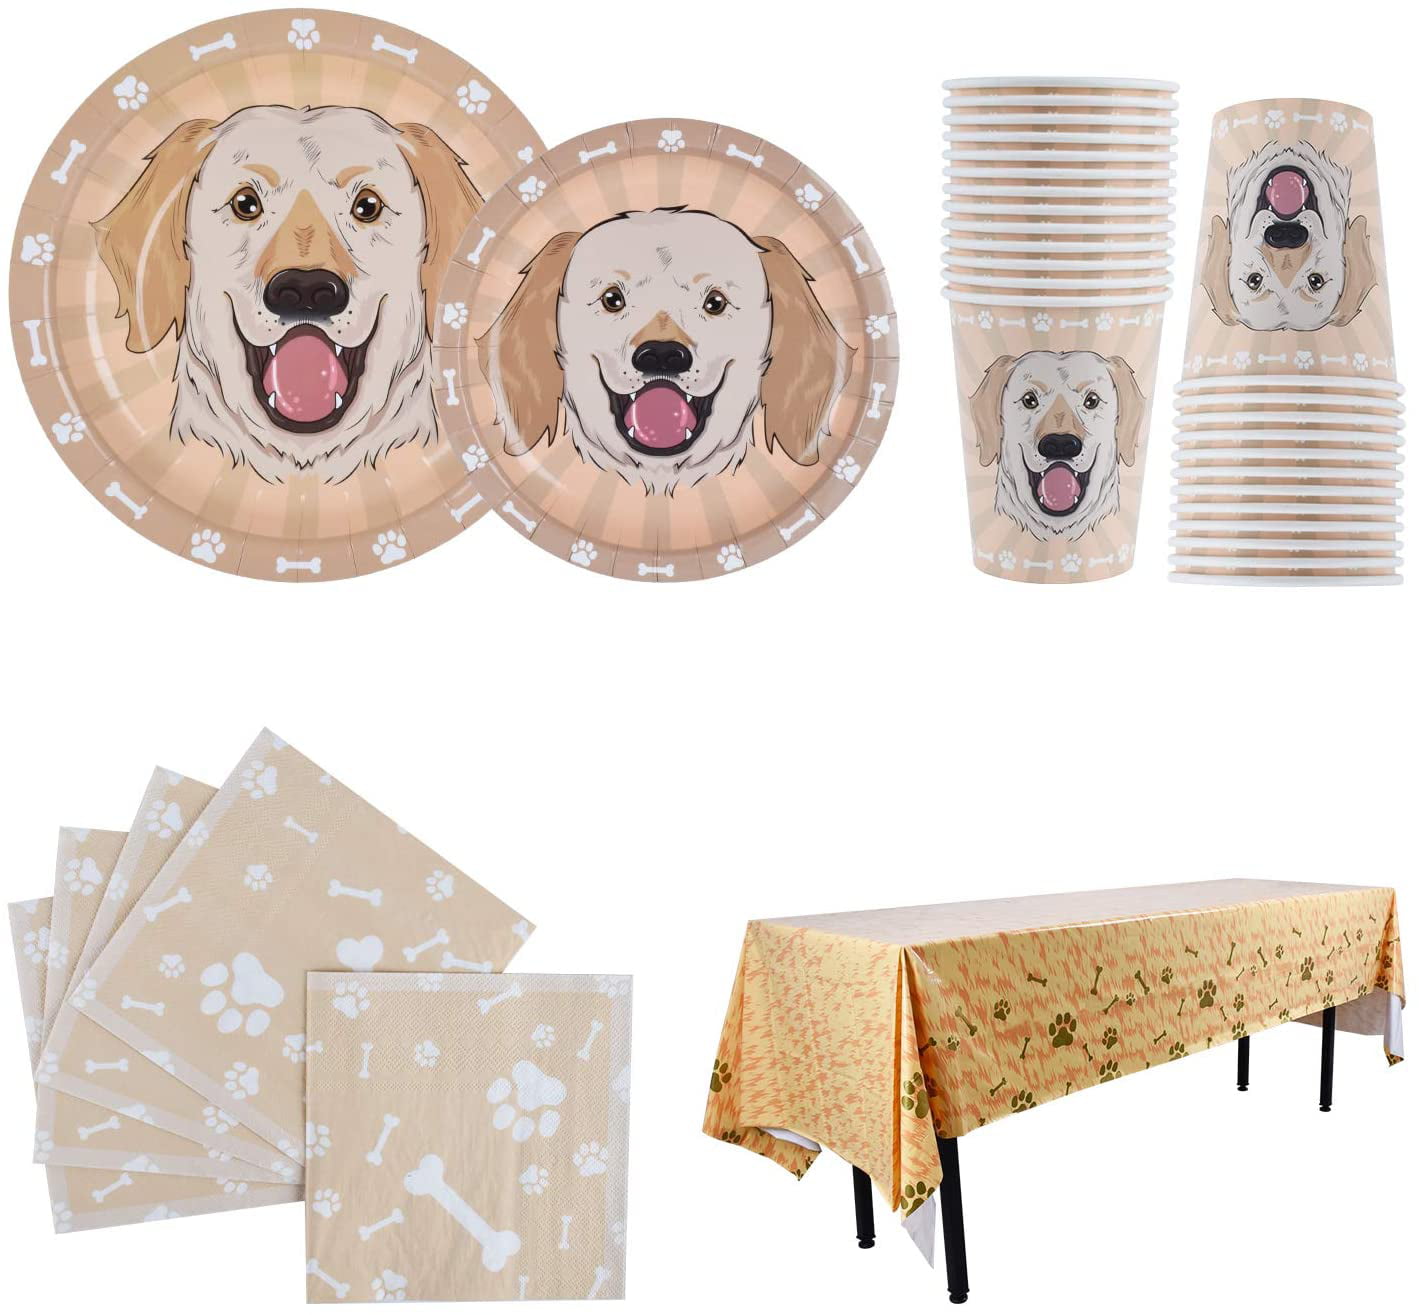 Dog Disposable Tableware with Dog Paw Prints Plates Cups Napkins Serves 20 for Dog Puppy Birthday Theme Party Decorations Dog Paw Prints Party Supplies